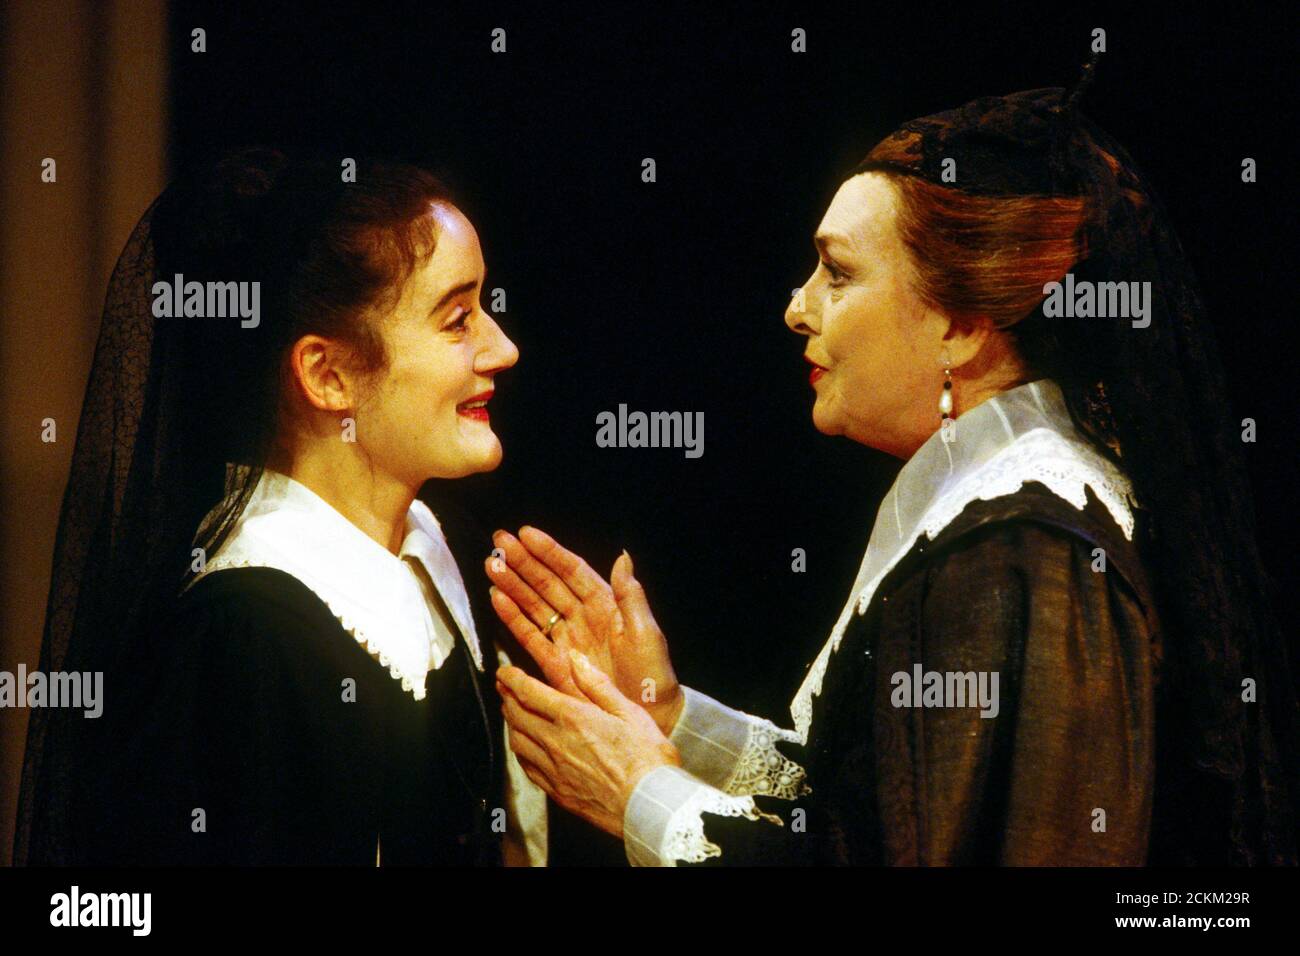 l-r: Sophie Thompson (Helena), Barbara Jefford (Countess of Rousillion) in ALL'S WELL THAT ENDS WELL by Shakespeare at the Royal Shakespeare Company (RSC), Swan Theatre, Stratford-upon-Avon, England  30/06/1992  design: John Gunter  lighting: Rick Fisher  director: Peter Hall Stock Photo